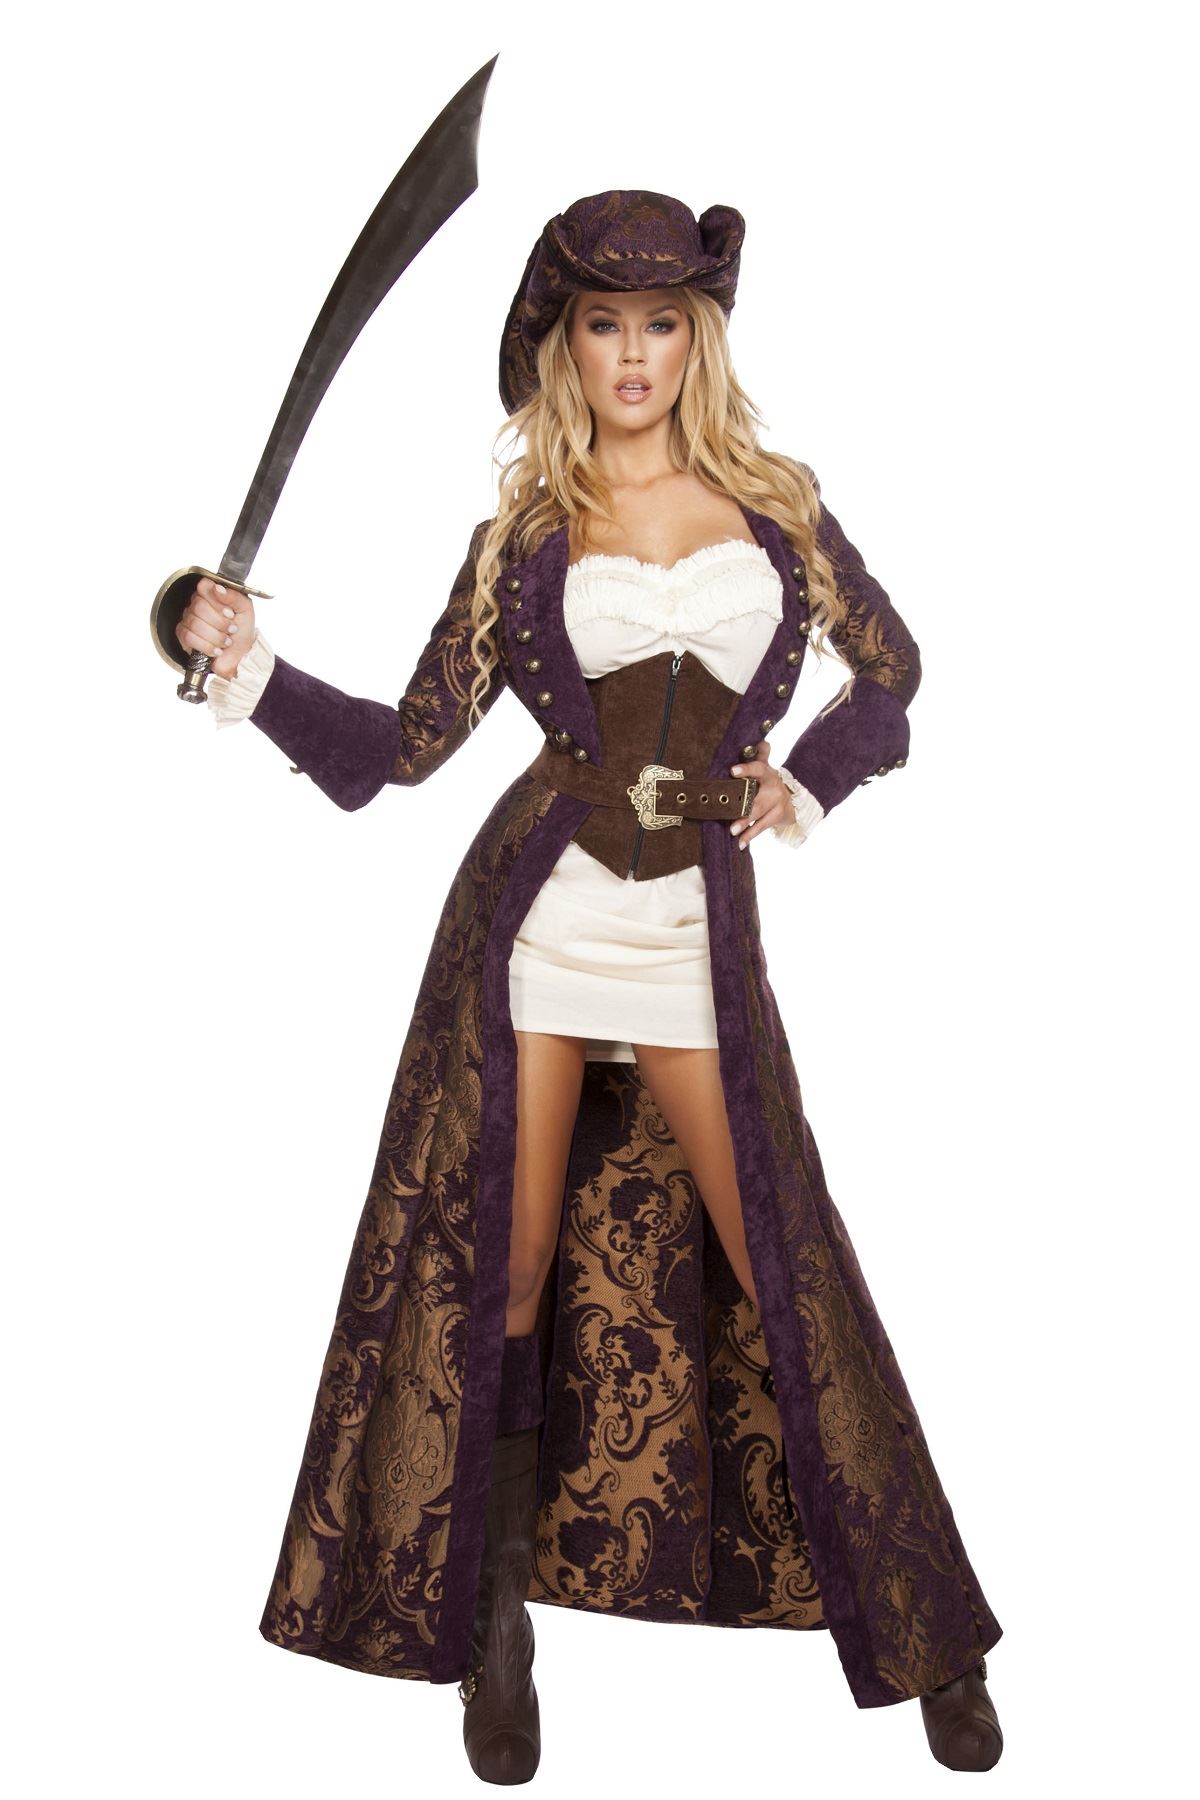 Adult Decadent Pirate Diva Woman Deluxe Costume 22999 The Costume Land 7051